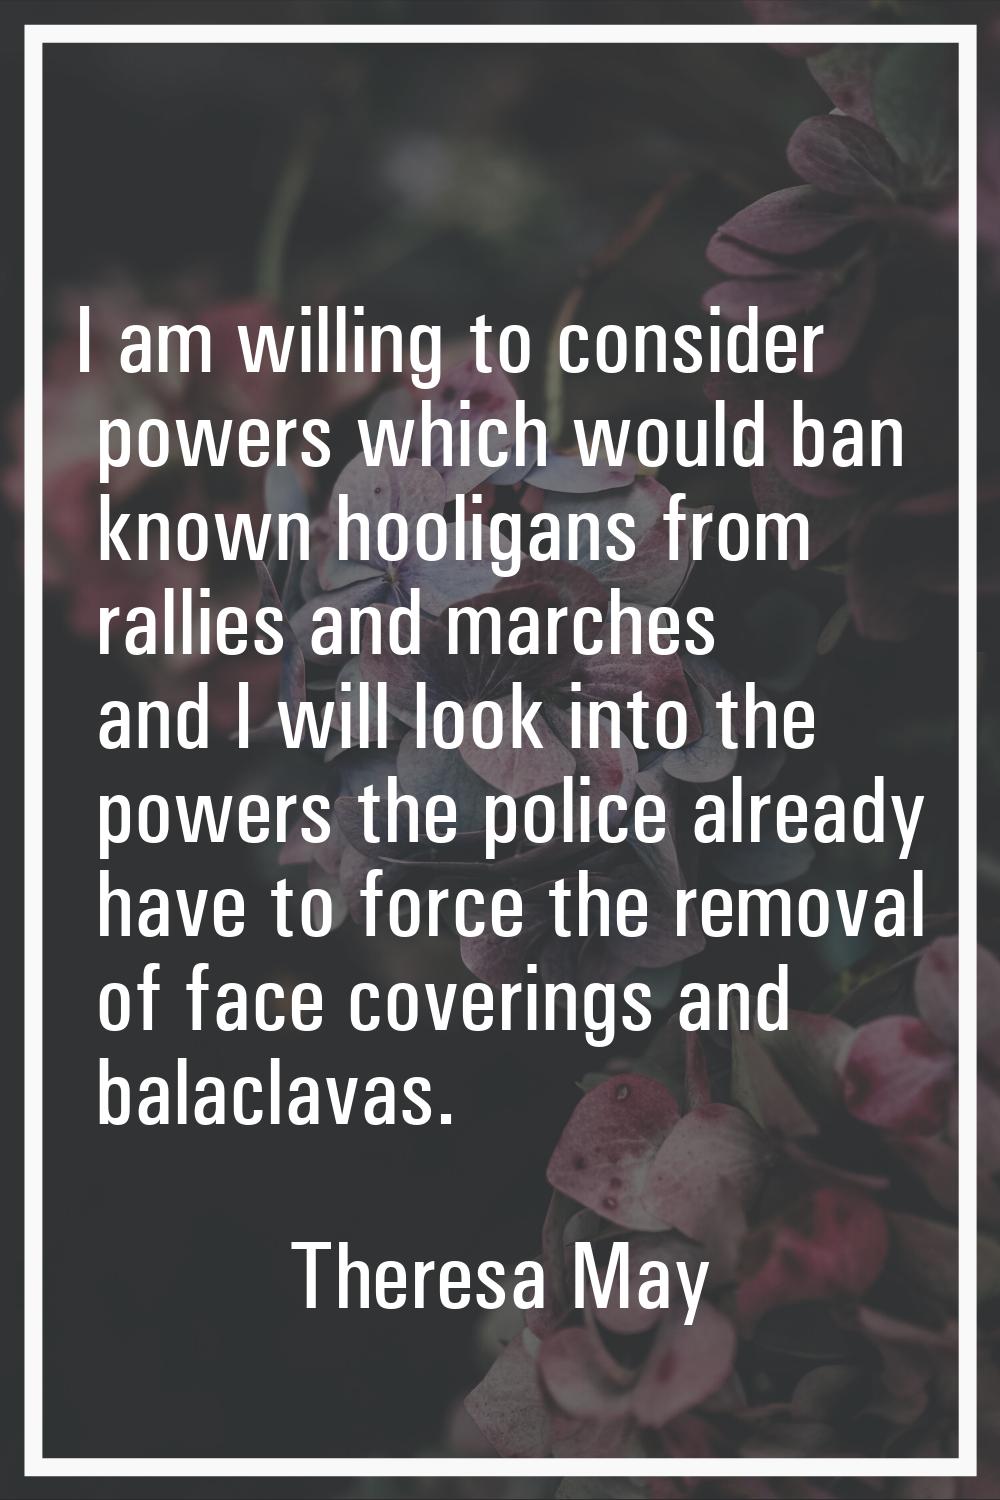 I am willing to consider powers which would ban known hooligans from rallies and marches and I will